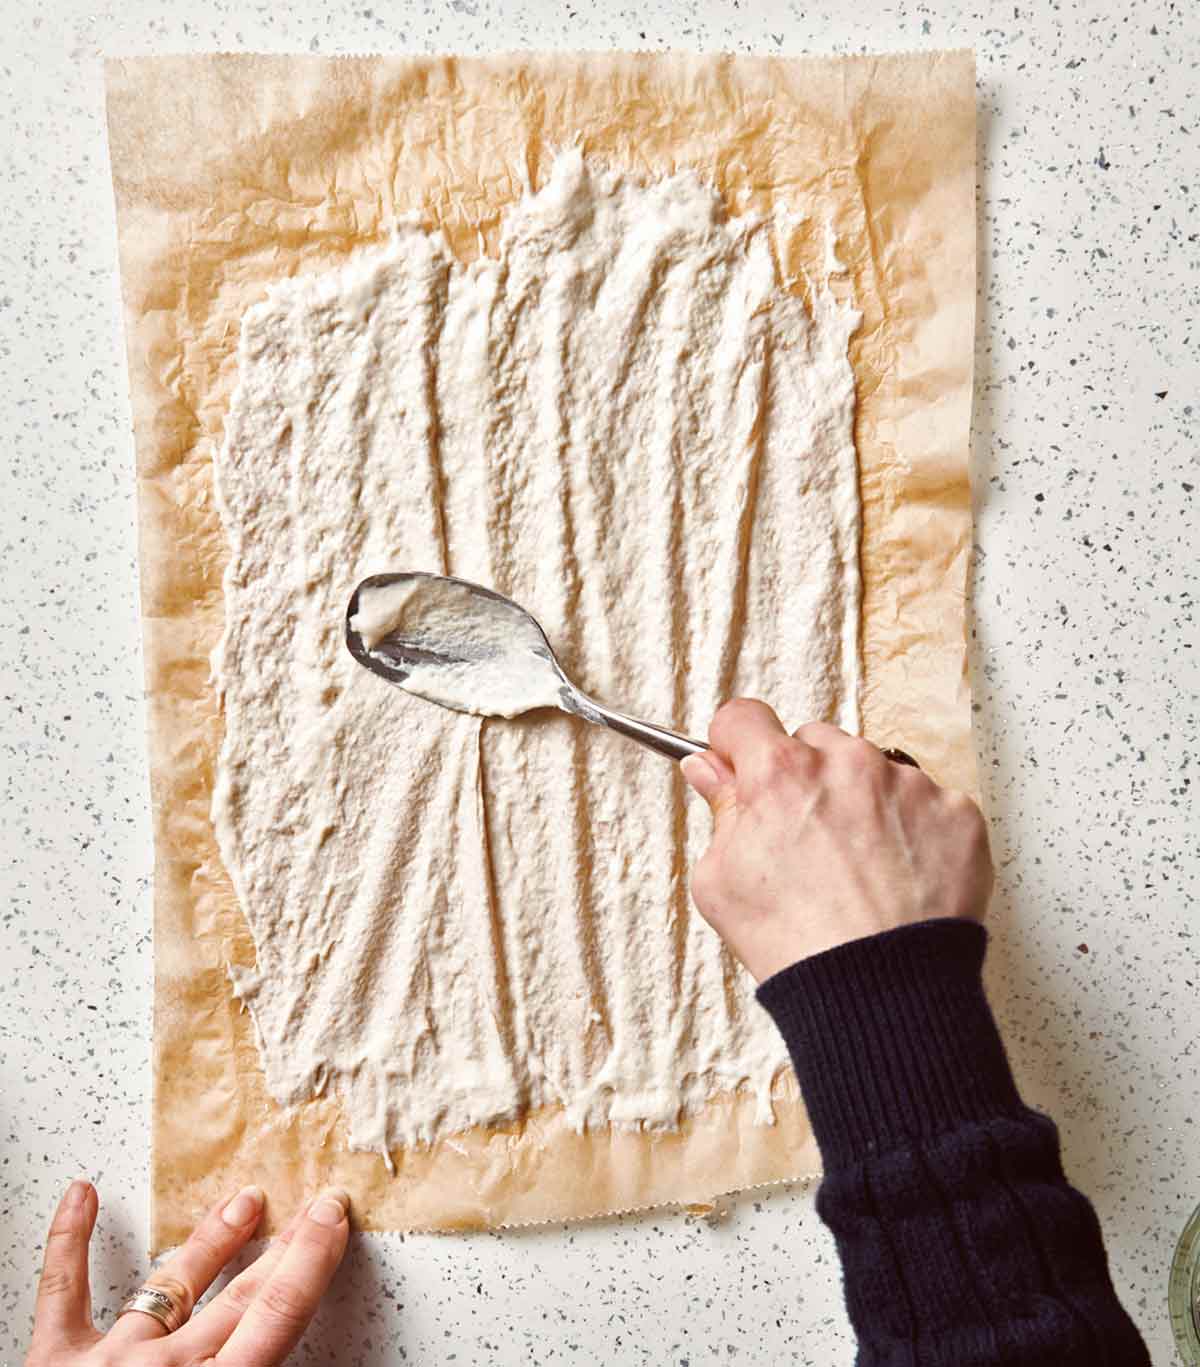 A person spreading sourdough starter on a piece of parchment